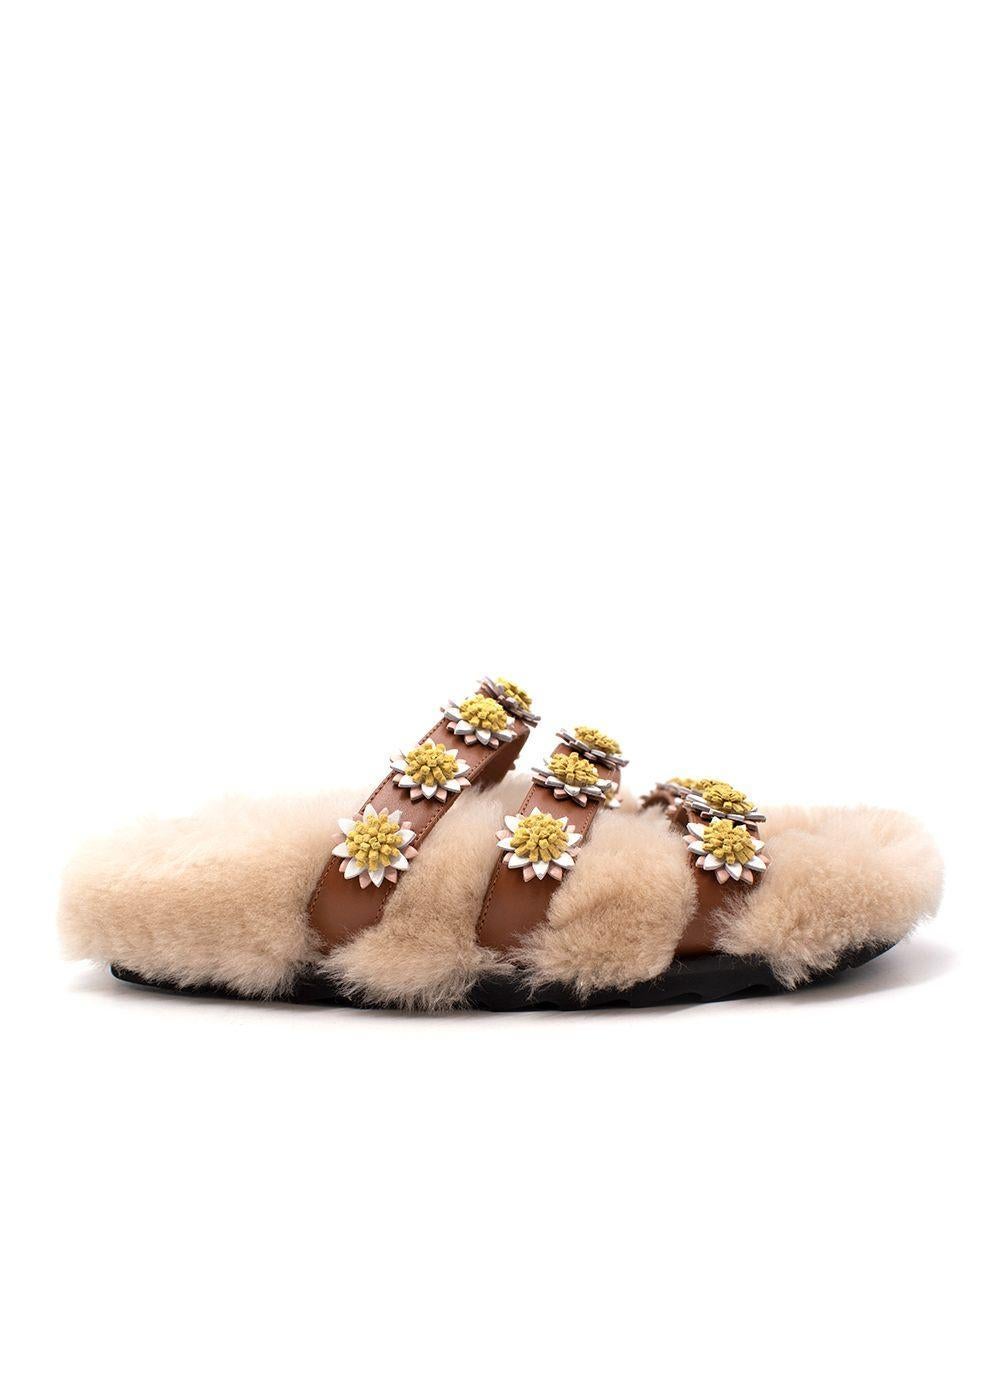 Fabrizio Viti Daisy Strap Shearling-Lined Sandals

- Supple leather straps with daisy applique scattered throughout
- Lined with soft shearing
- Contrasting black sole

Materials:
Leather
Shearing

Made in Italy

9.5
Excellent condition

PLEASE